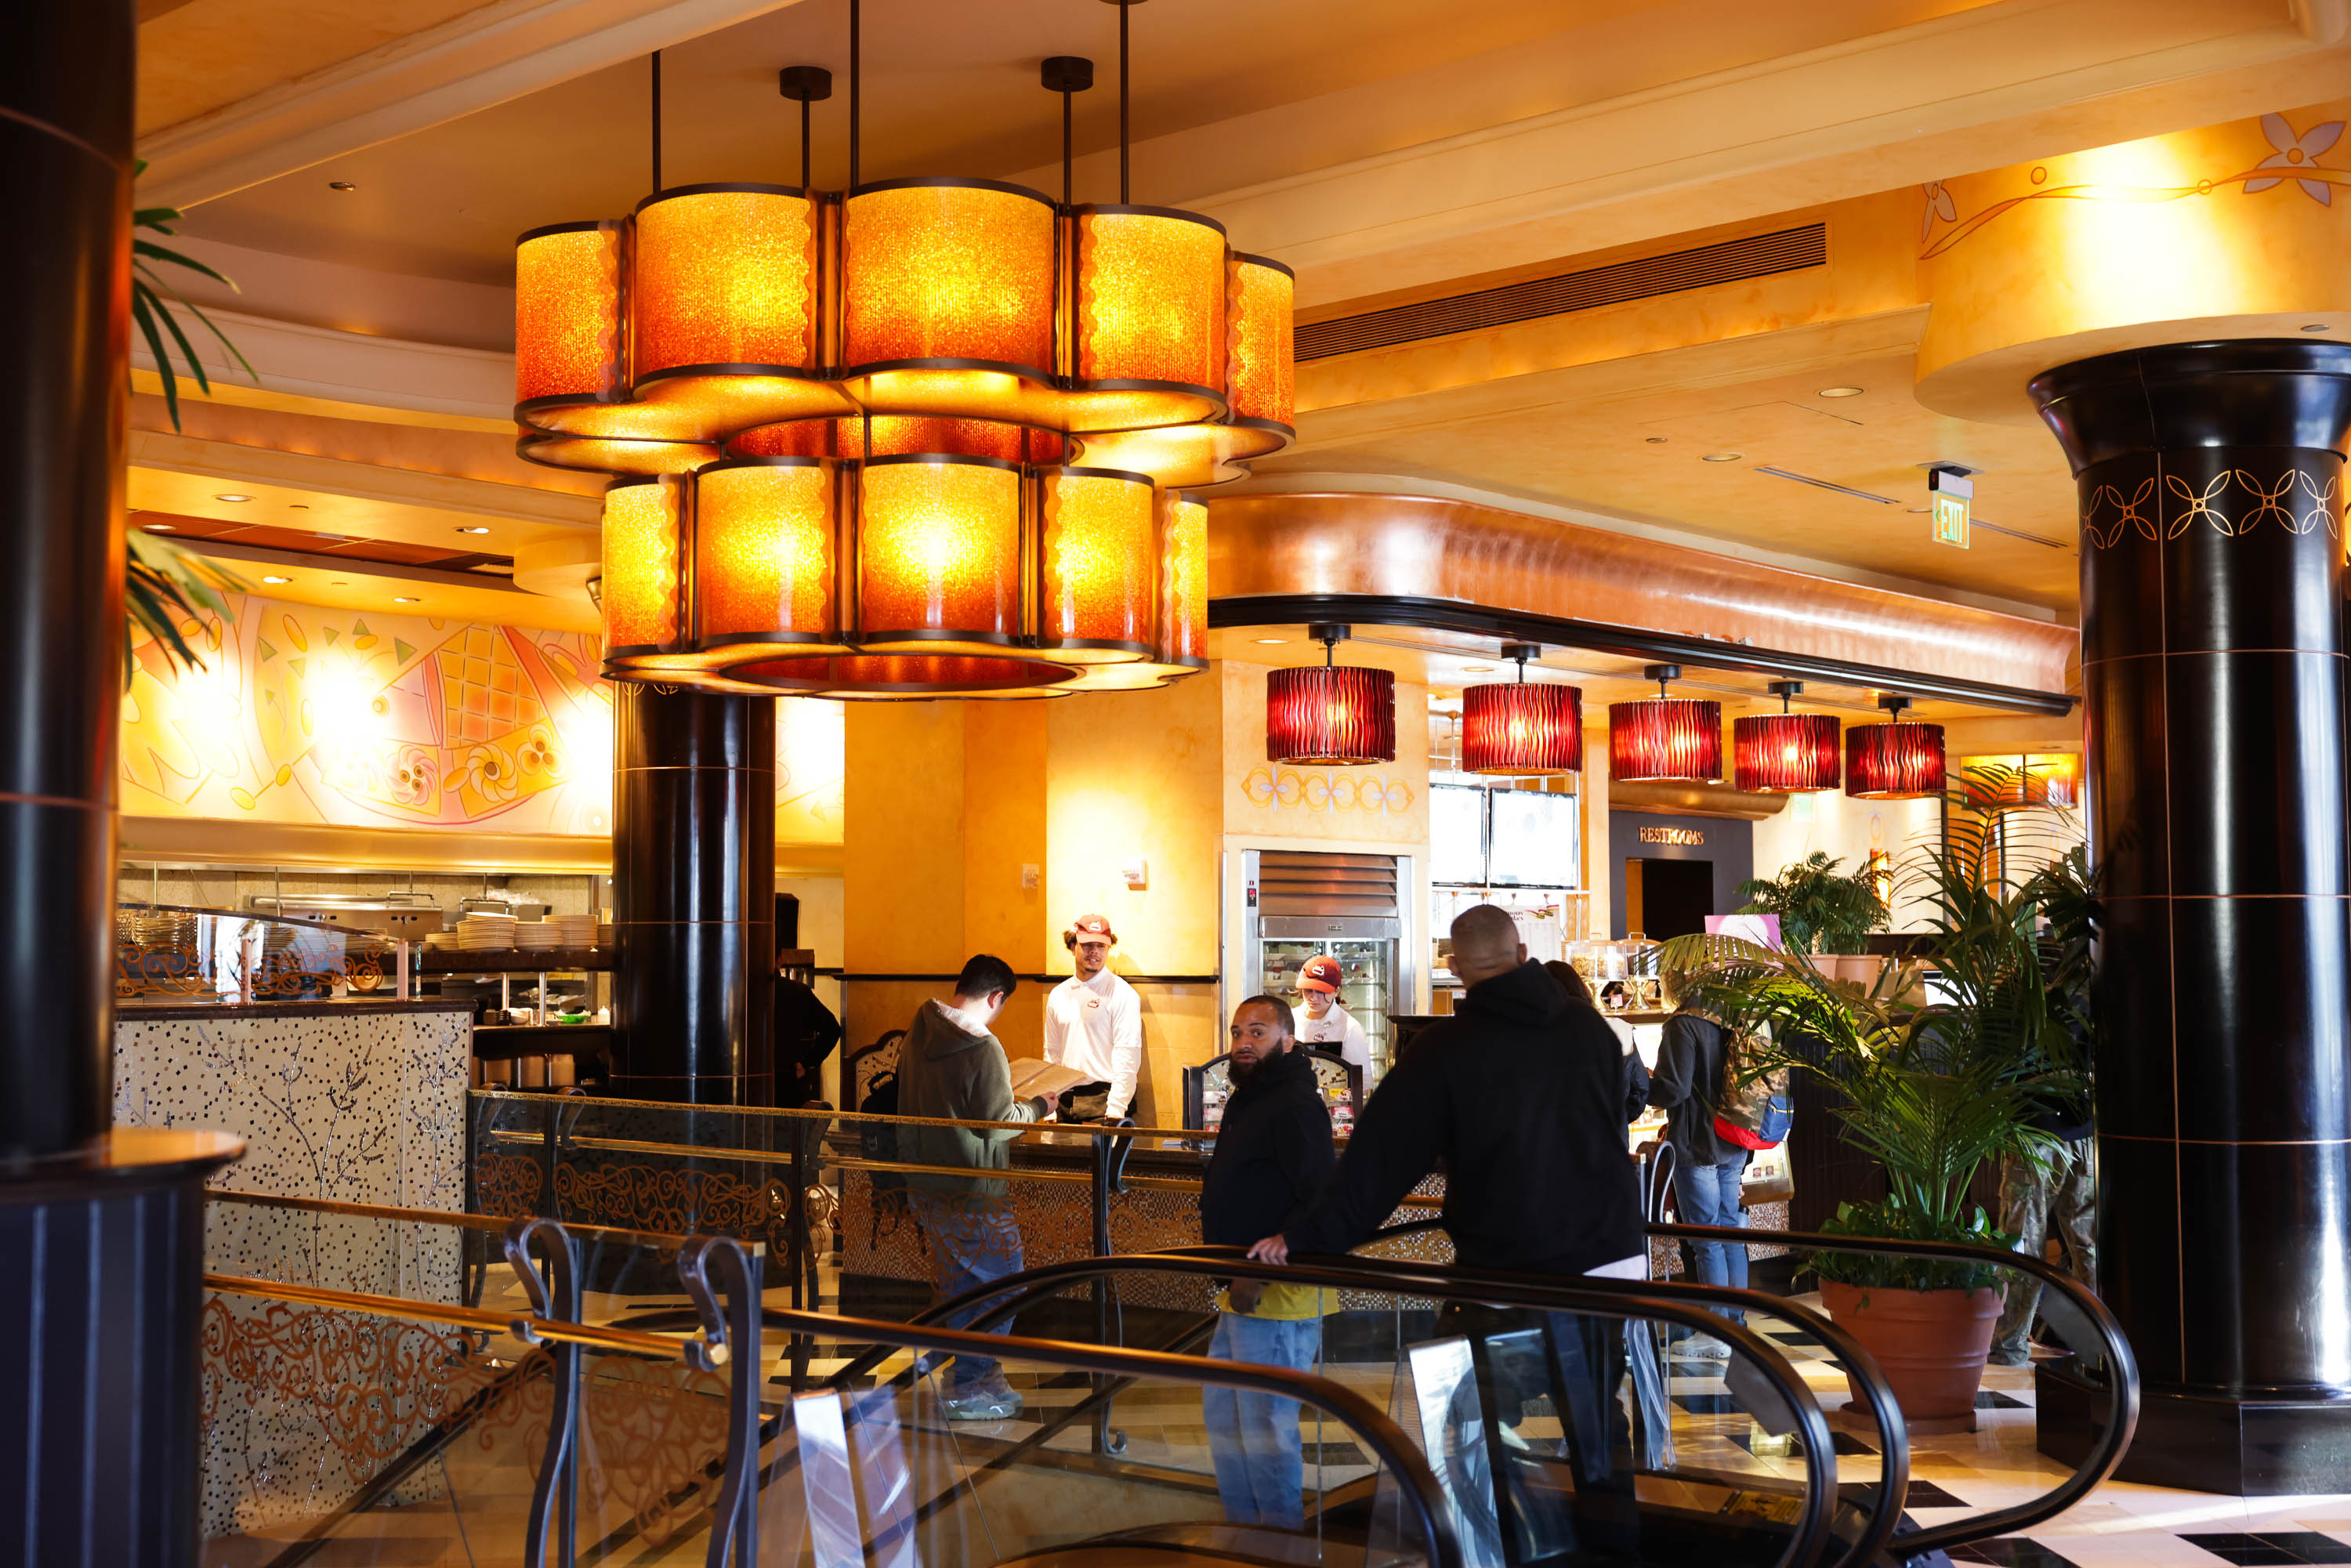 The image shows a warm-lit, upscale restaurant with patrons and chefs, large pendant lamps, and ornate decor.